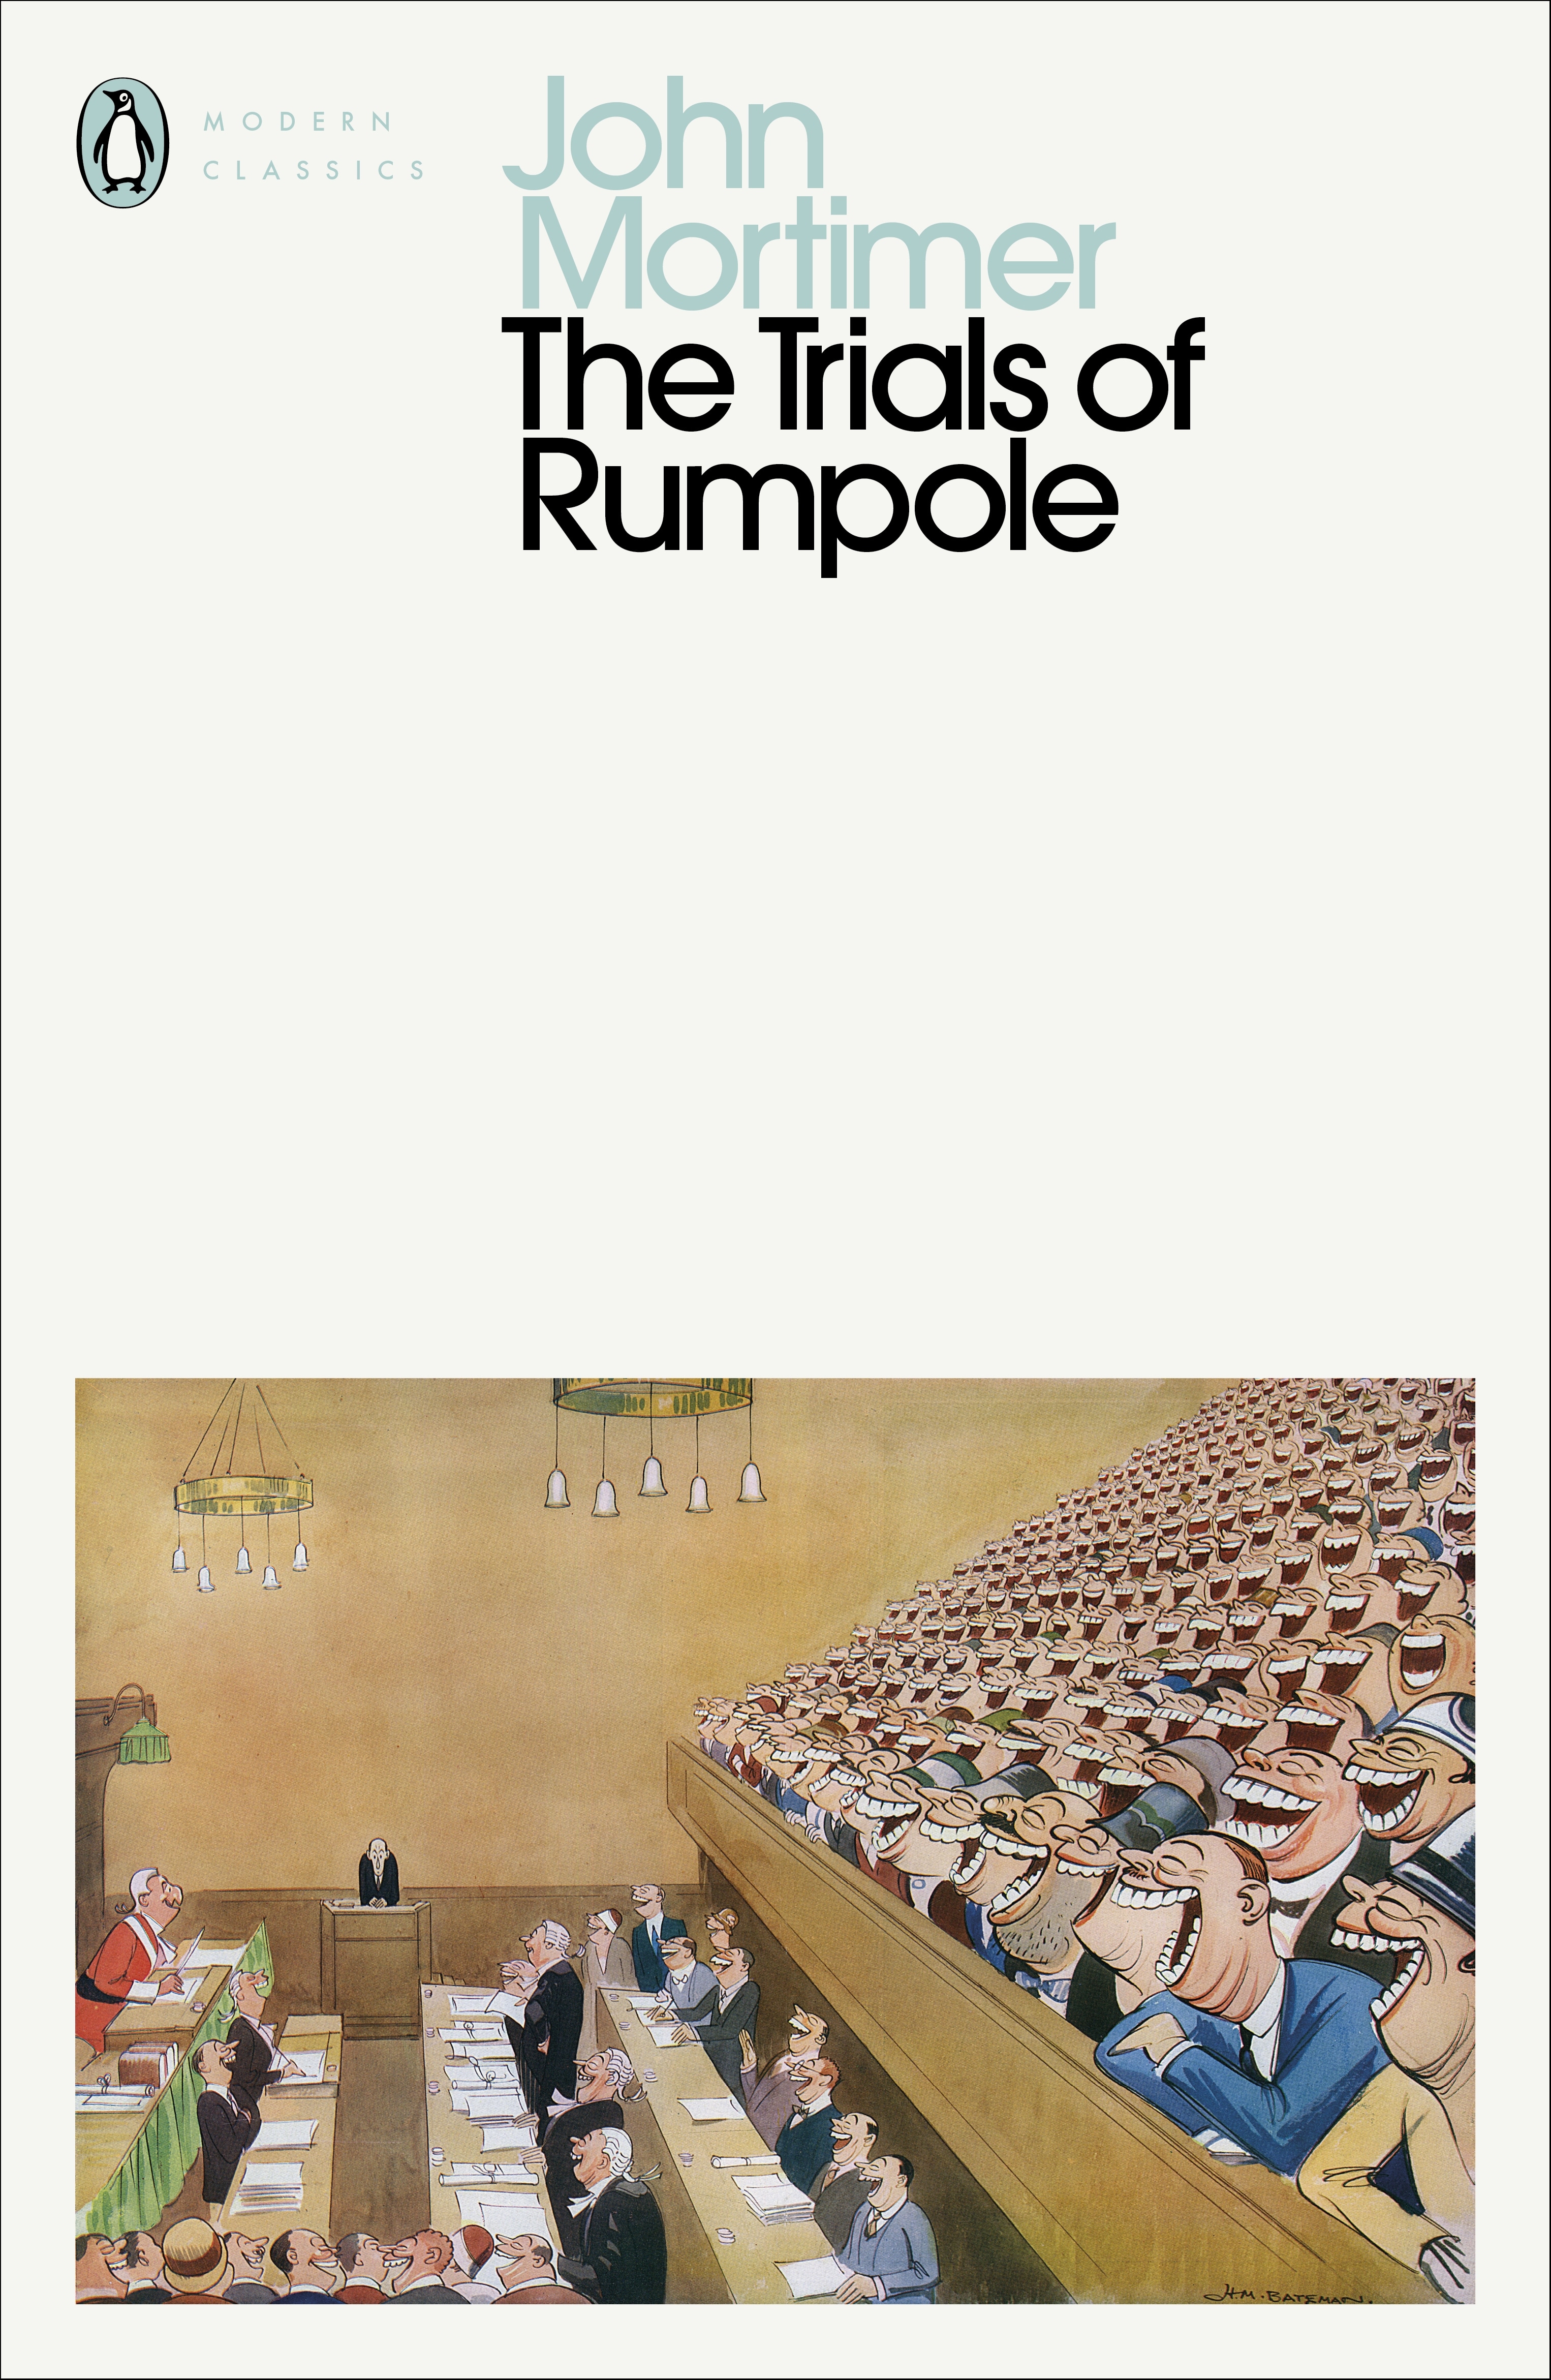 Book “The Trials of Rumpole” by John Mortimer — March 25, 2021